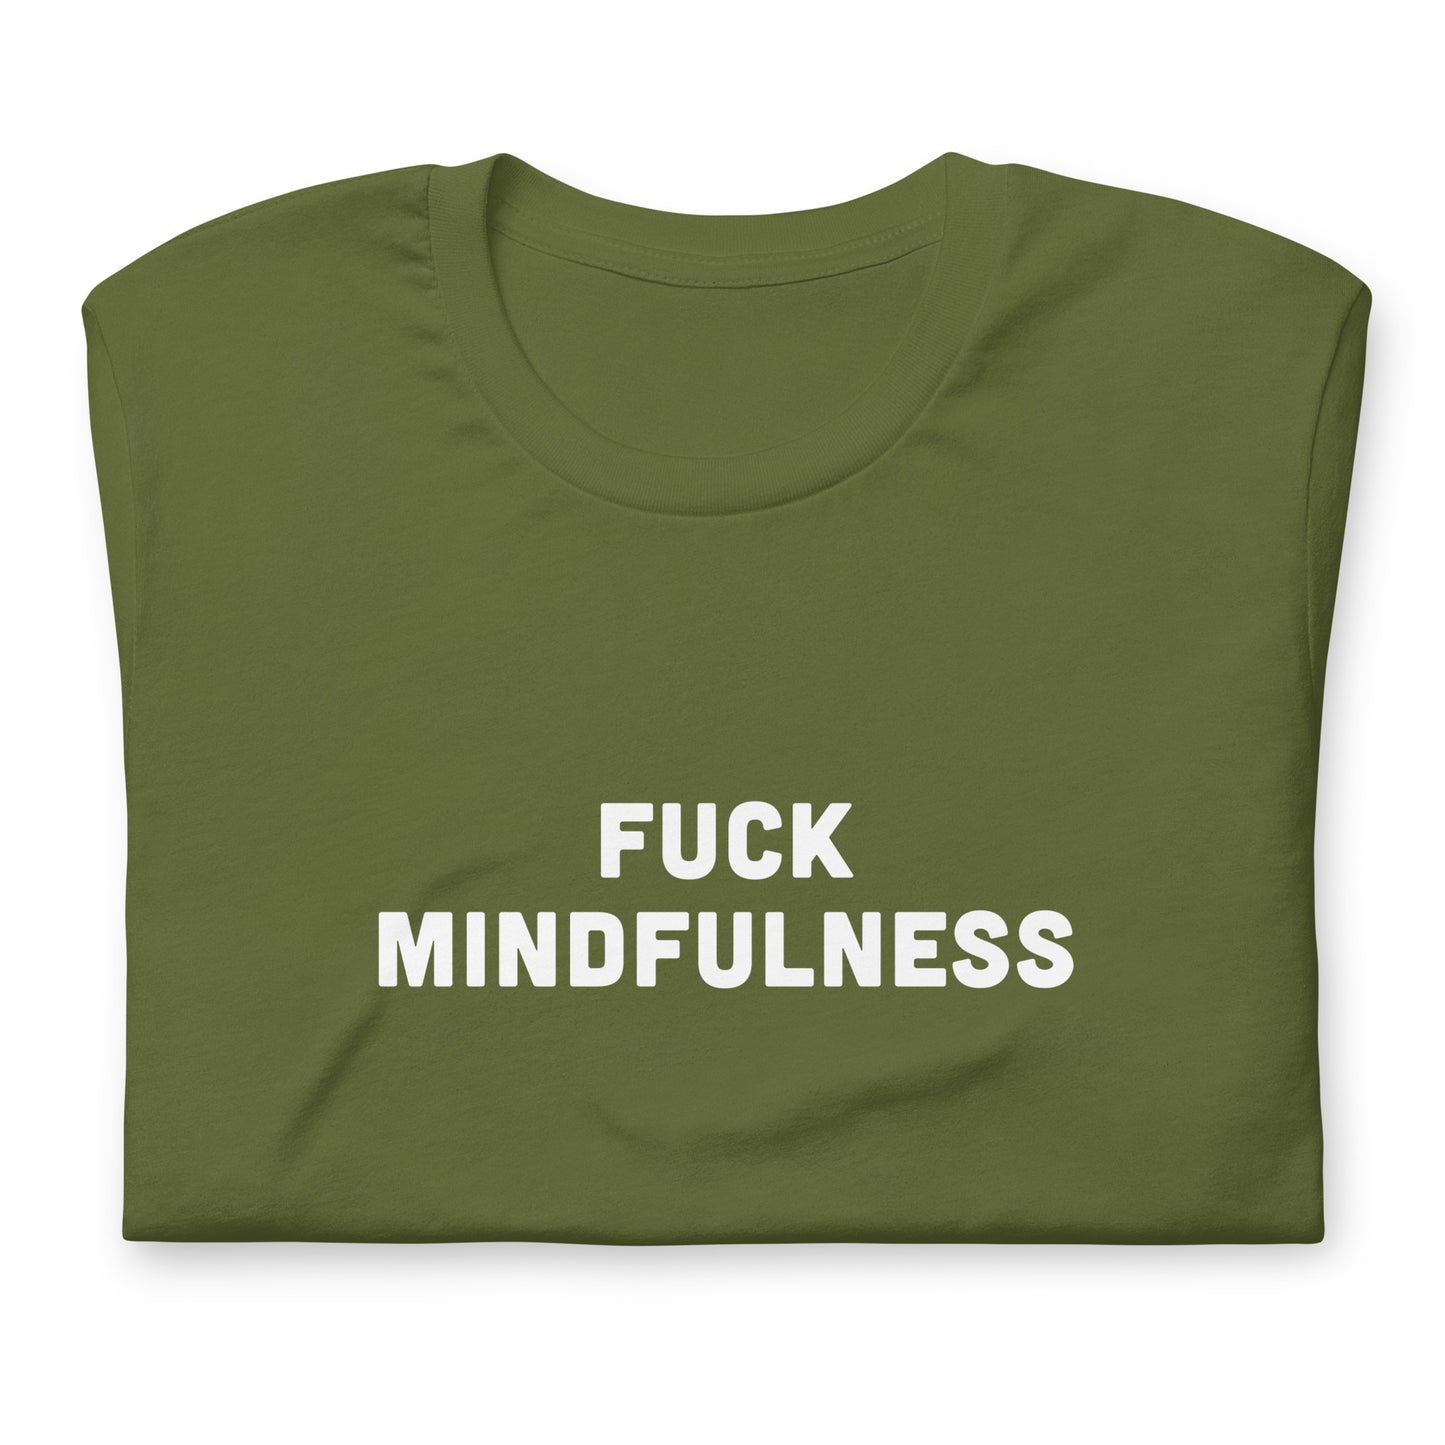 Fuck Mindfulness T-Shirt Size M Color Navy